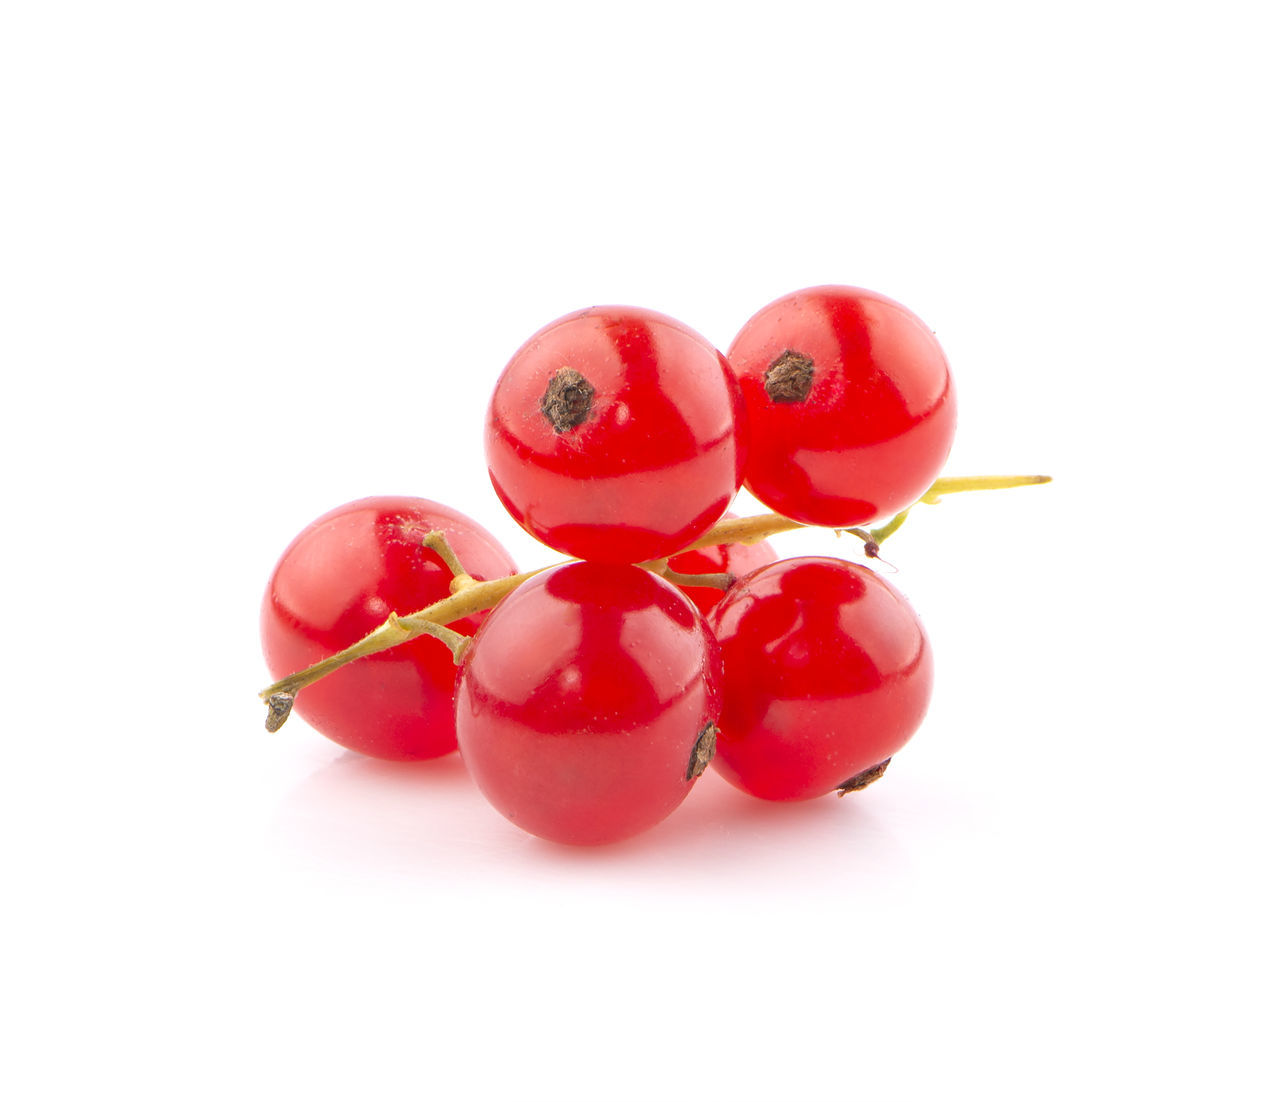 CLOSE-UP OF RED BERRIES AGAINST WHITE BACKGROUND